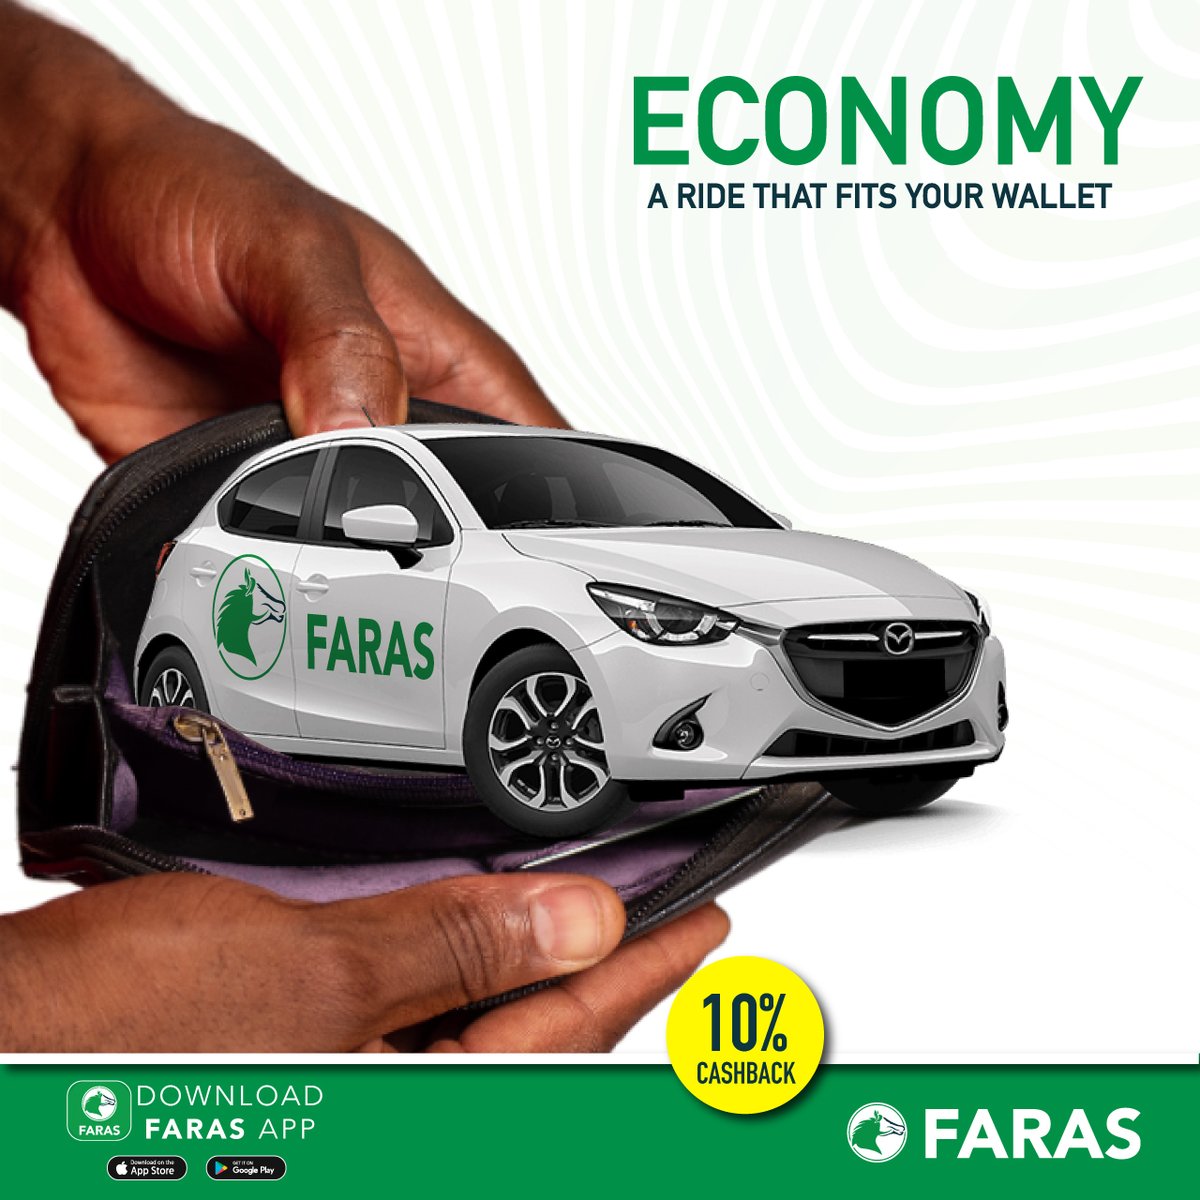 Unlock the perfect weekend journey with Faras!🚗 

Our rides are not just affordable, but tailored to fit your wallet.

Enjoy the weekend in style without stretching your traveling budget!

Download the Faras app now at faras.link/faras

#WeekendVibes #AffordableRides